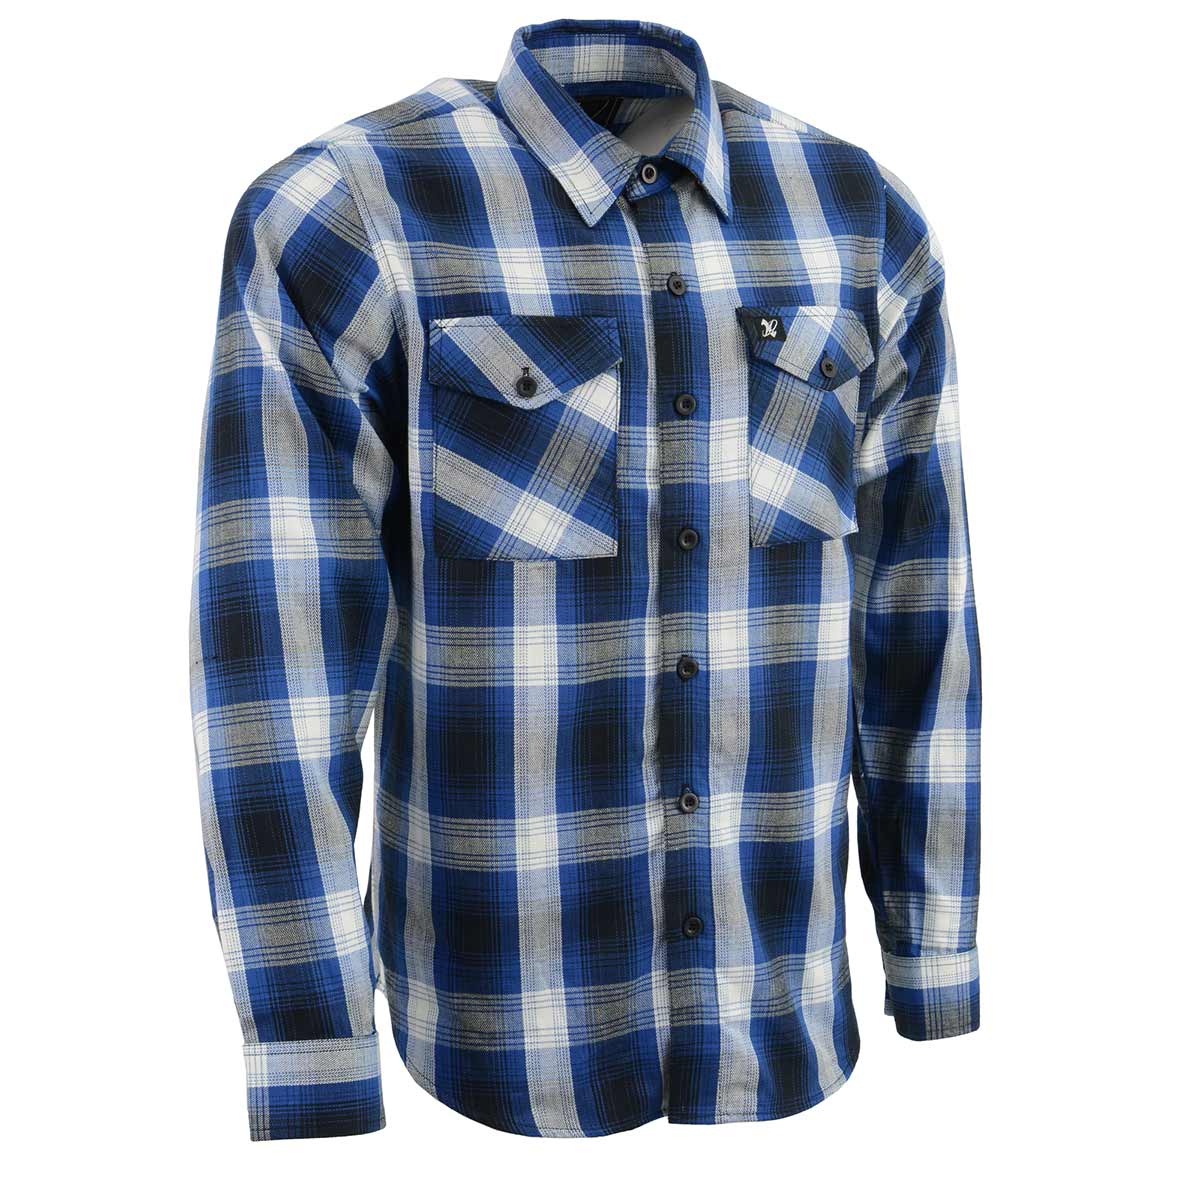 NexGen MNG11635 Men's Blue and White Long Sleeve Cotton Flannel Shirt